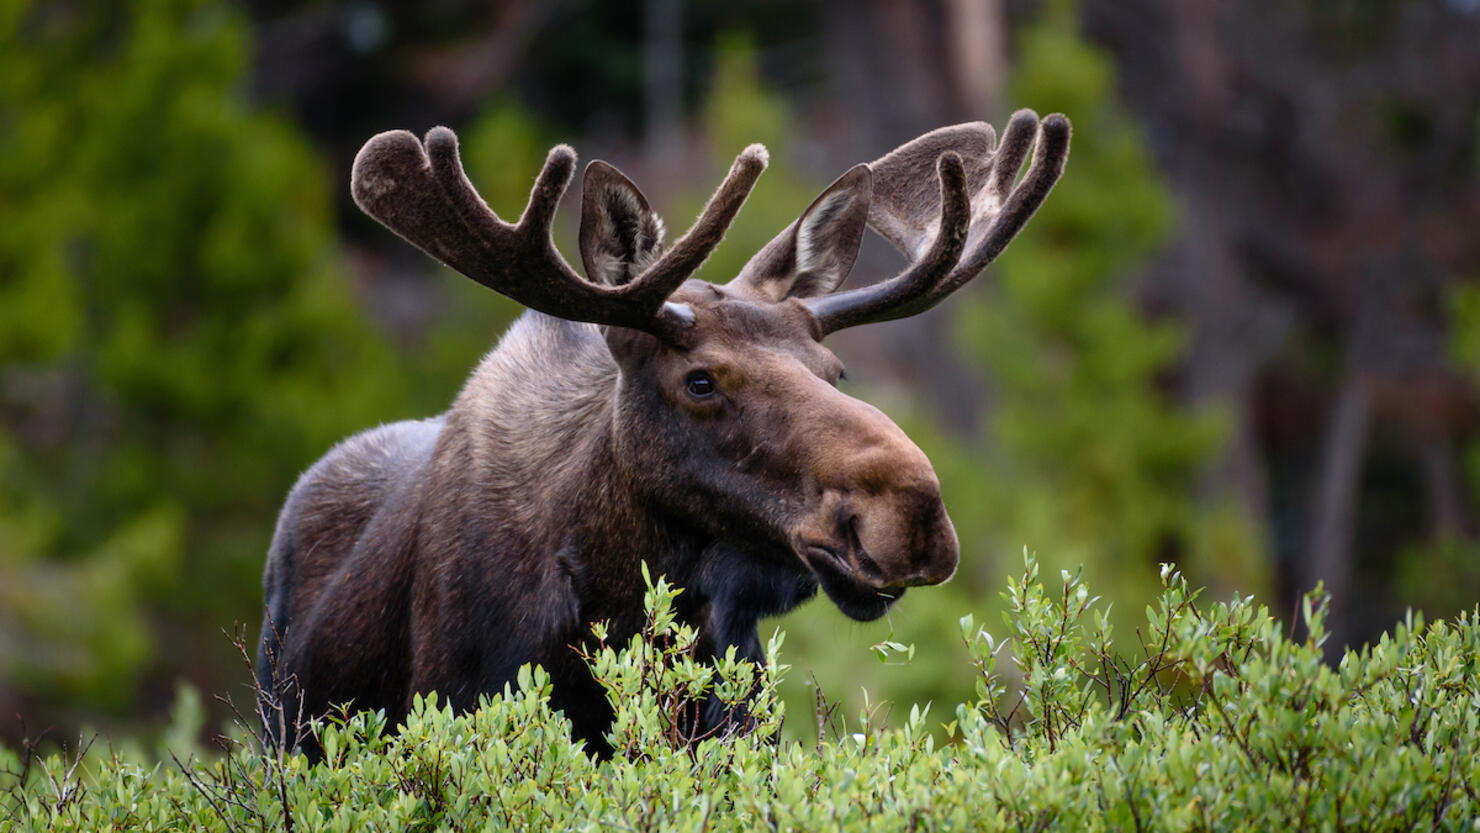 A moose moose in the forest,Fort Collins,Colorado,United States,USA